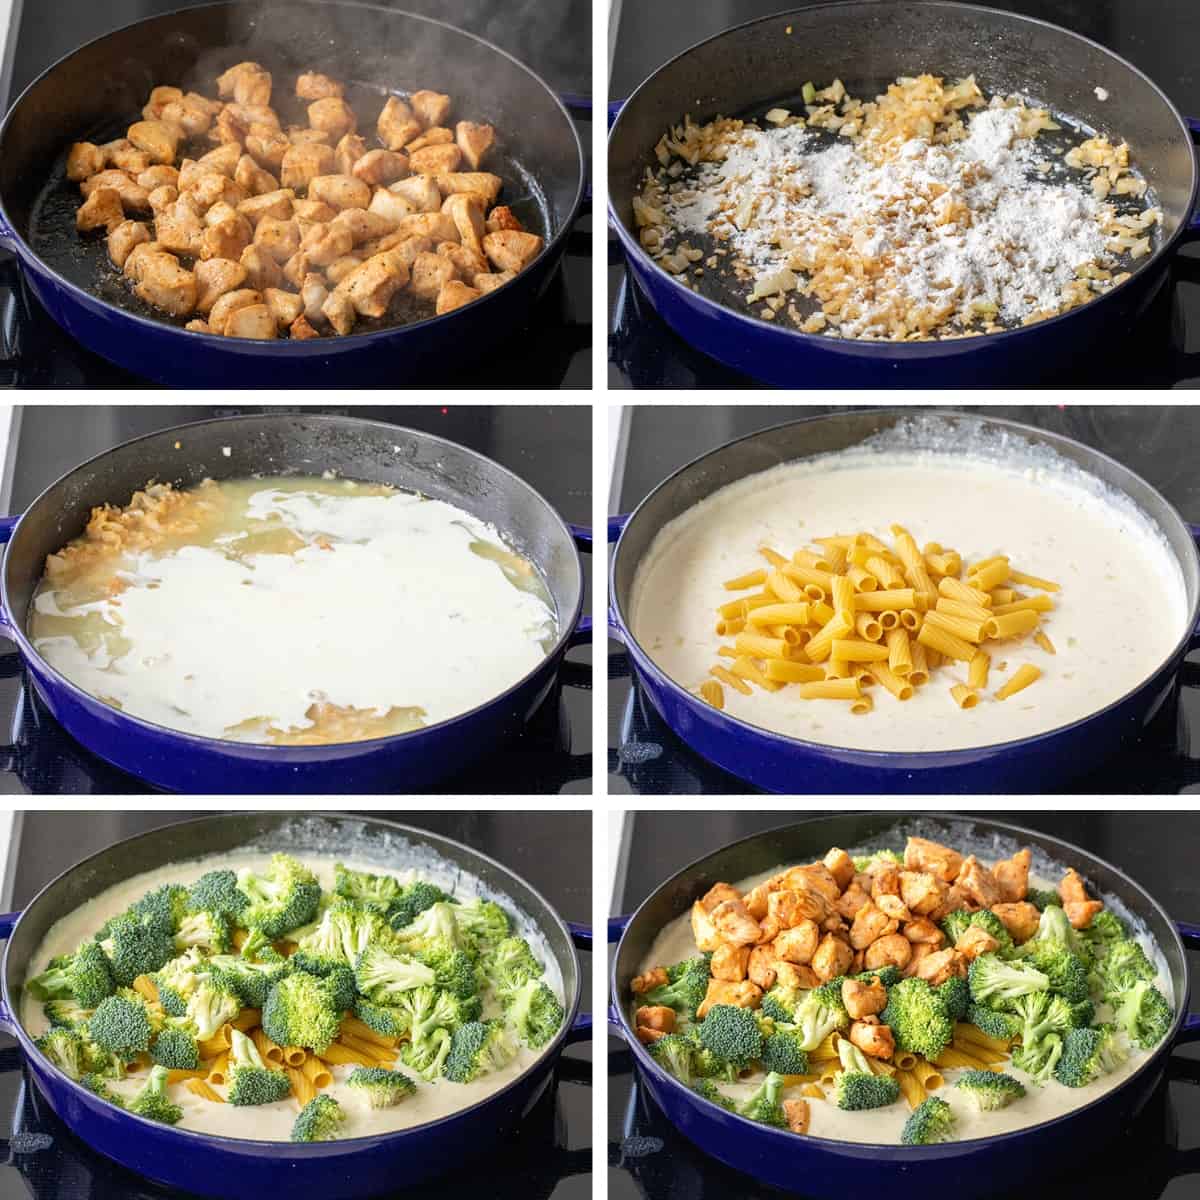 Steps for Making Chicken and Broccoli Pasta in a Skillet.